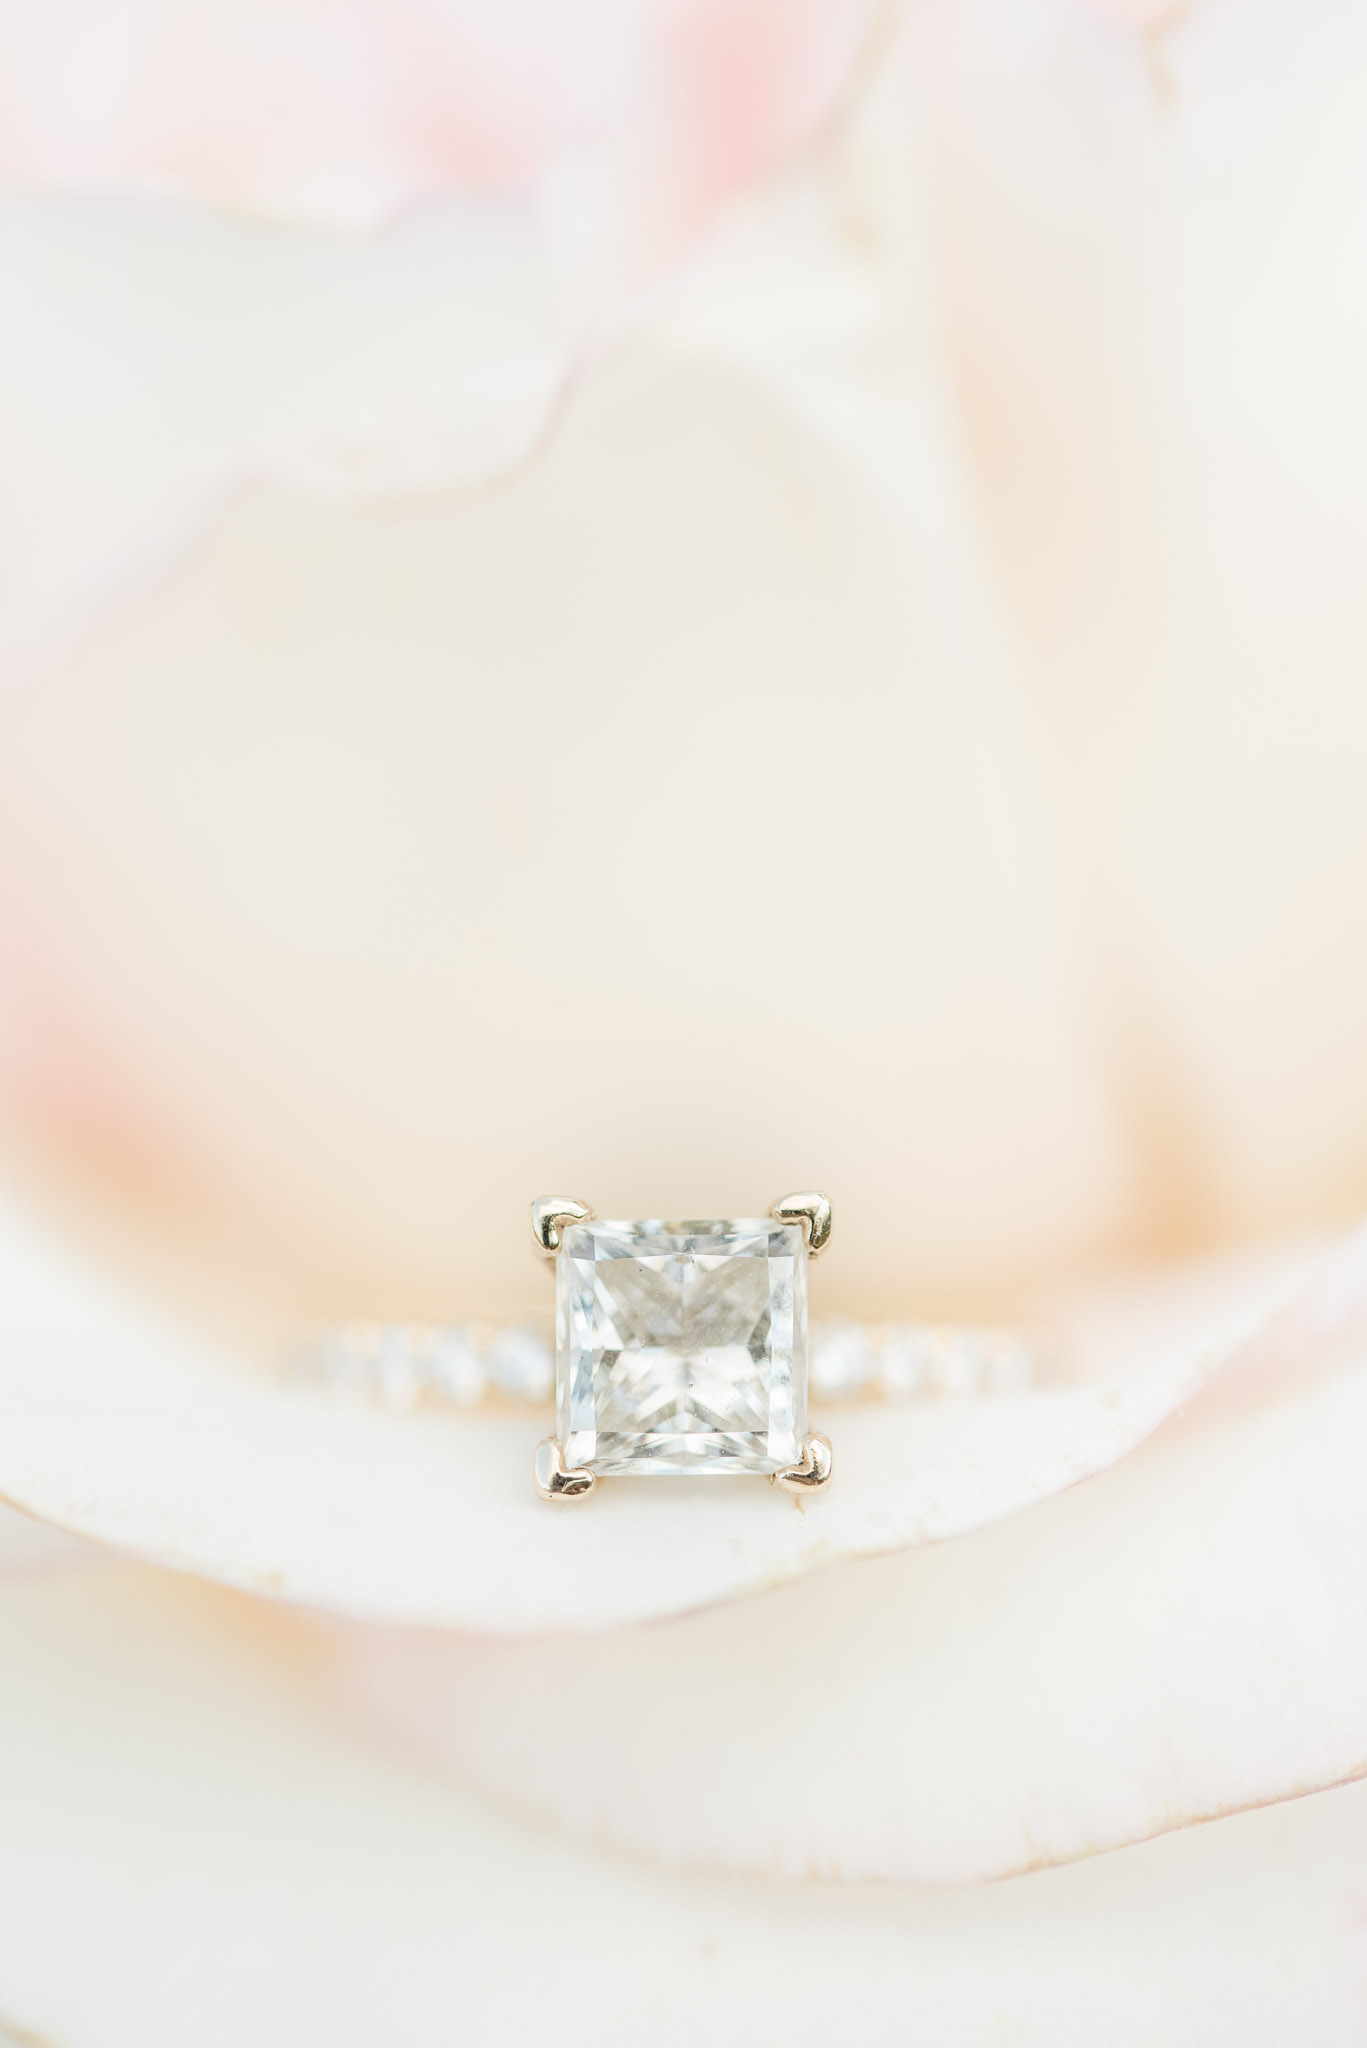 Engagement ring sits in cream rose.